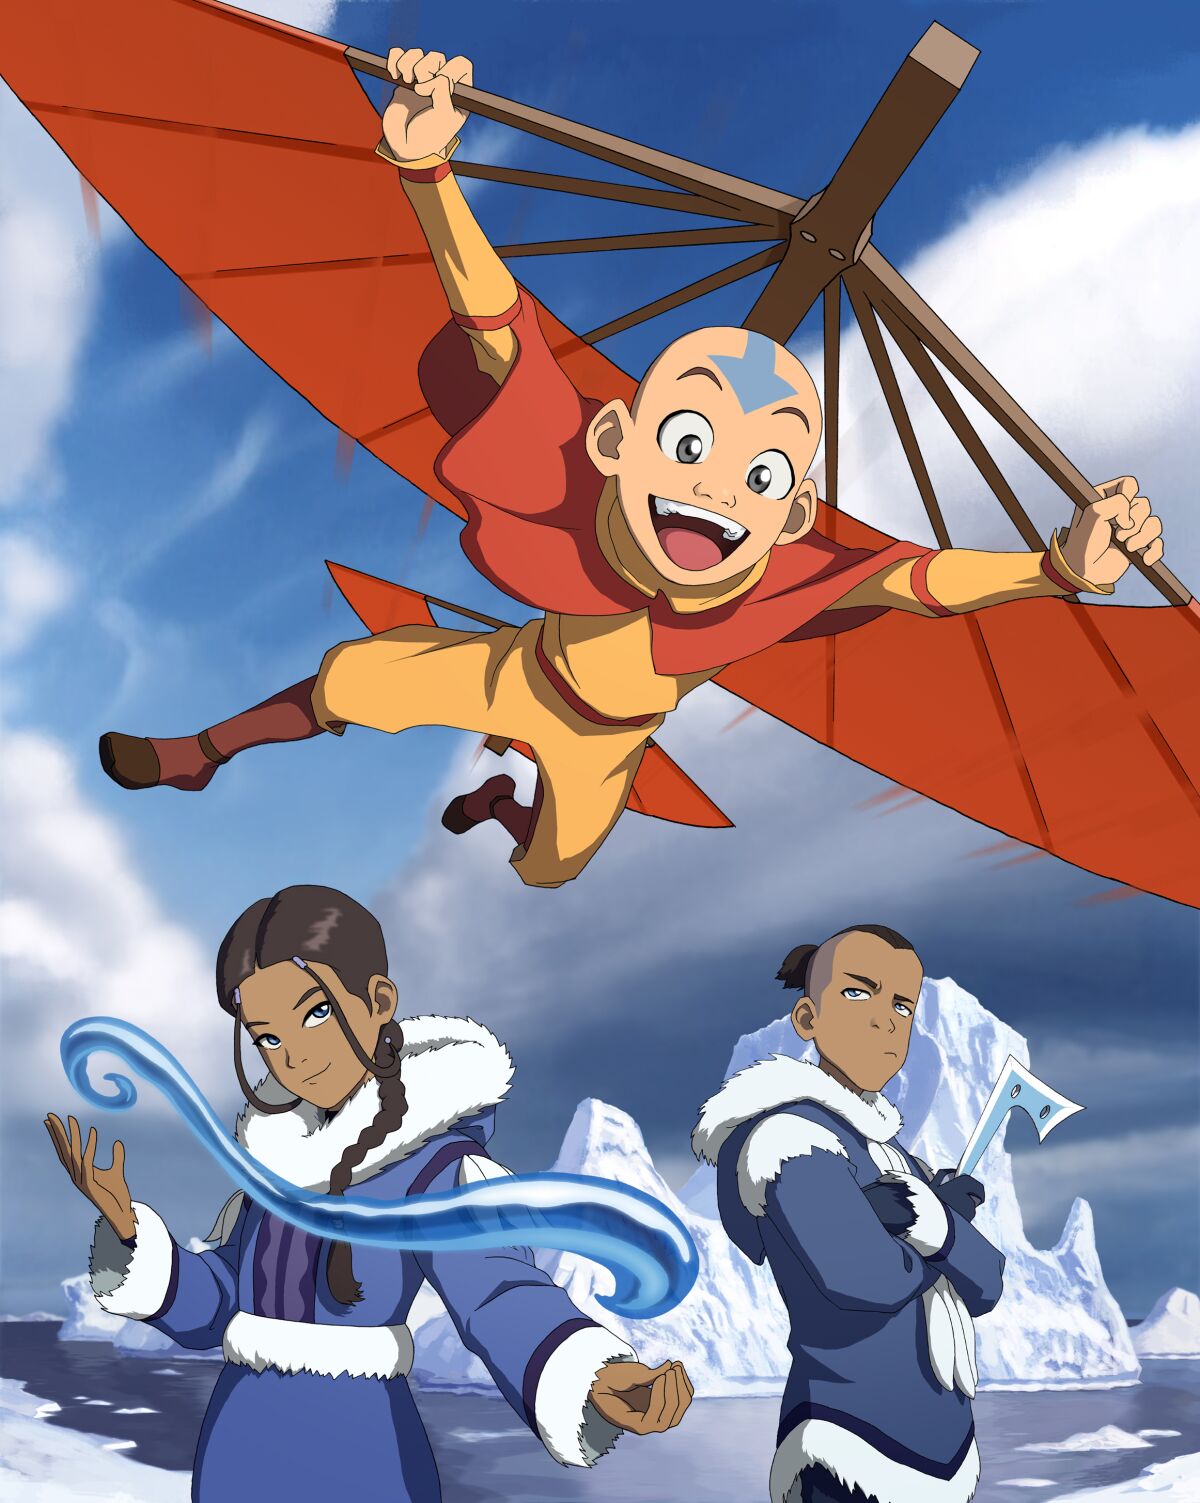 An animated boy uses a fan to glide over two people in a snowy landscape.